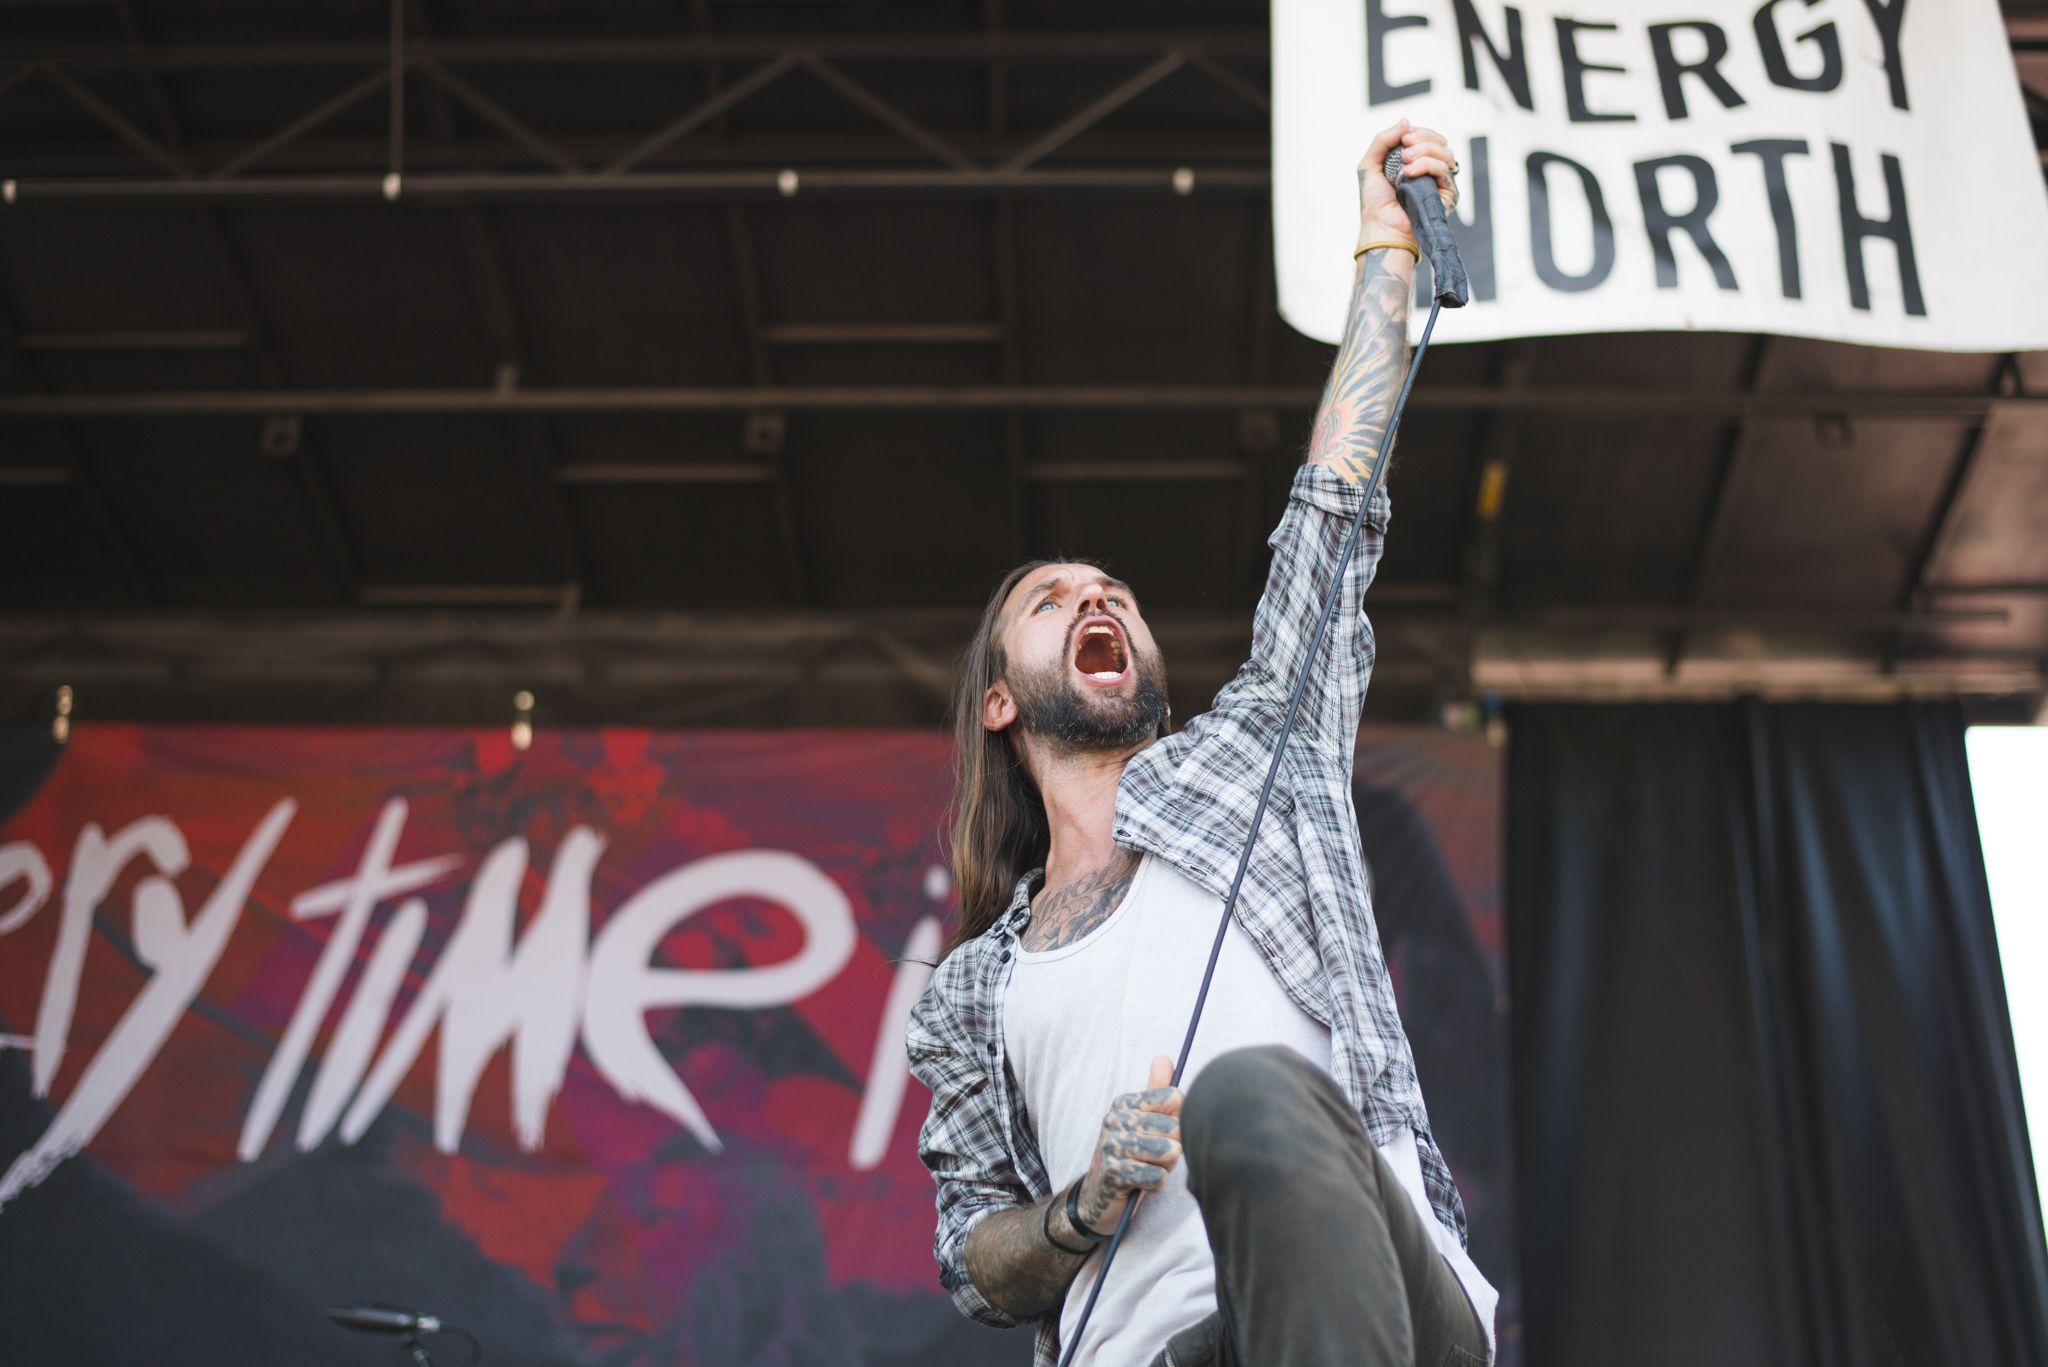 Every Time I Die - Photo by Lindsey Blane